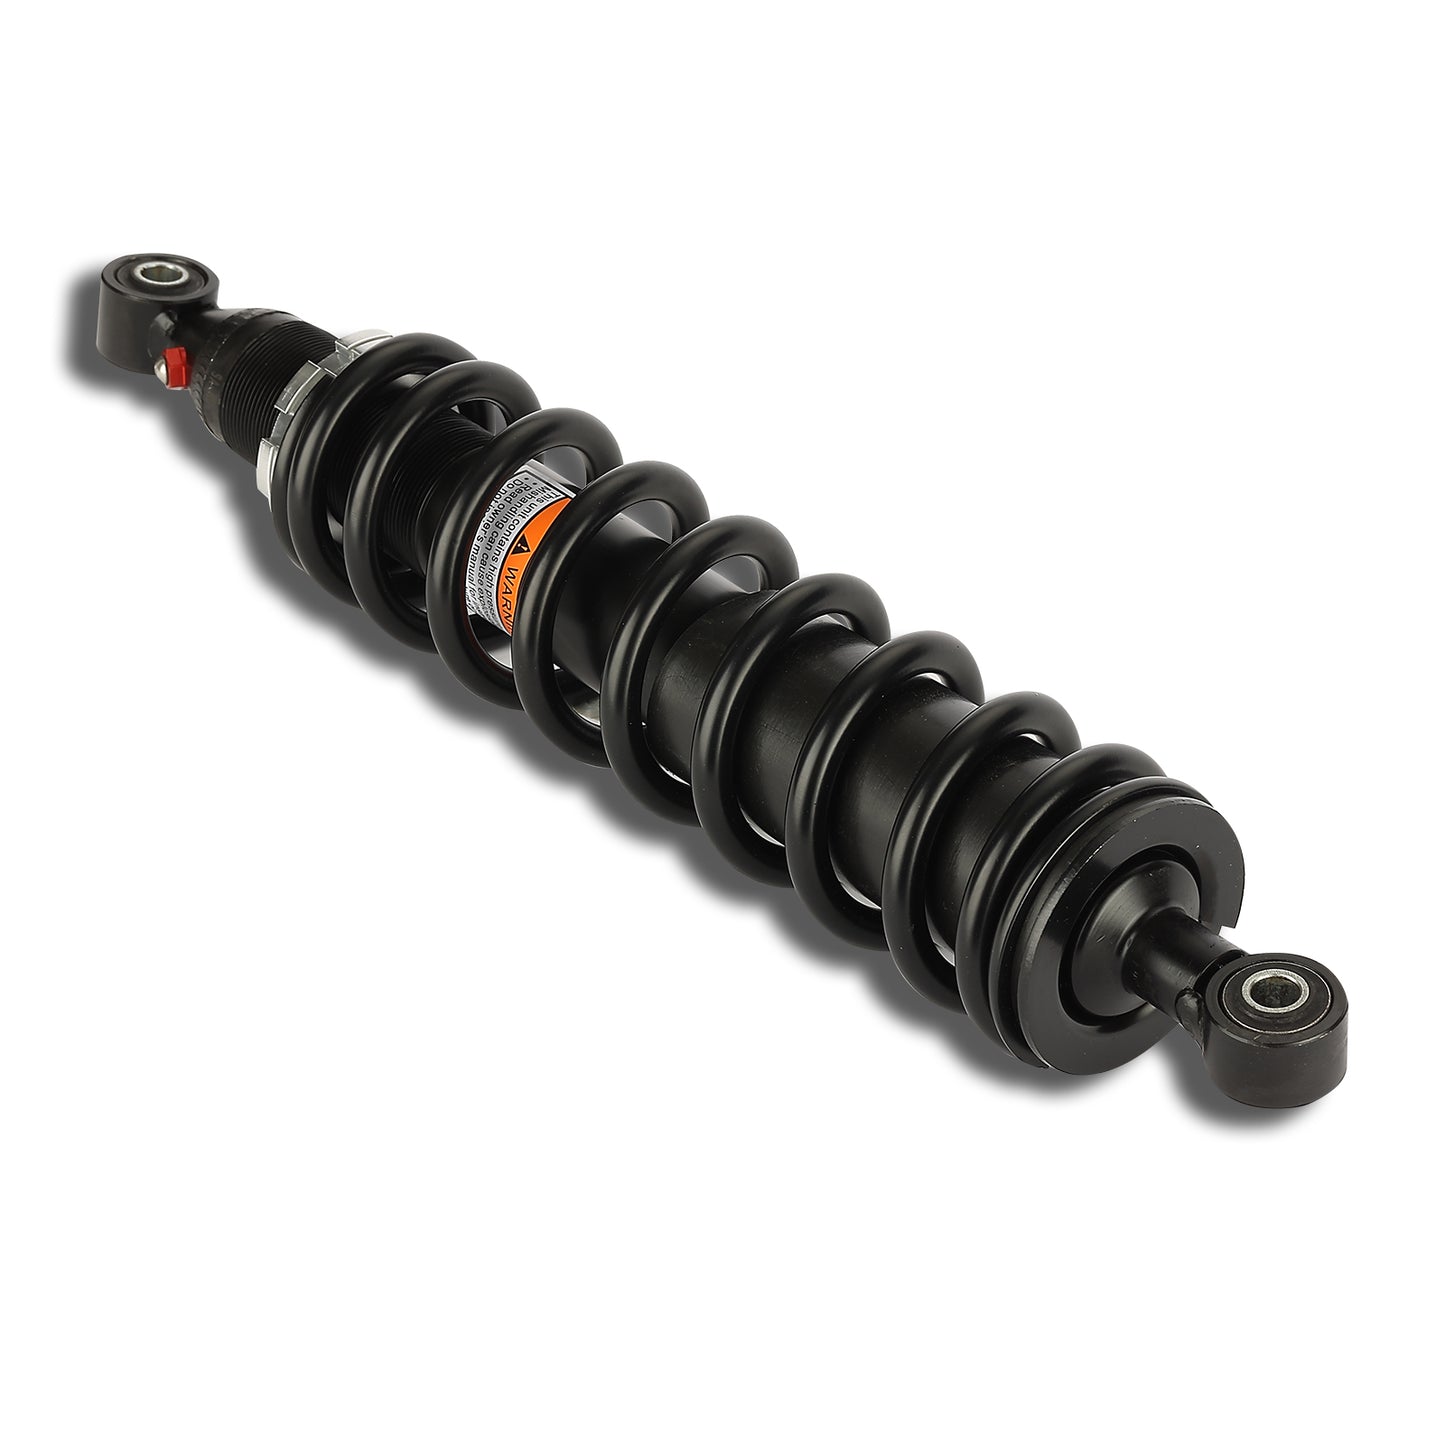 CAM-HO901 ATV Front Left/Right Shock Absorber Compatible with 2001-2014 Honda Rubicon 500 TRX 500 FA500 GPScape TRX 500FGA Front Shock